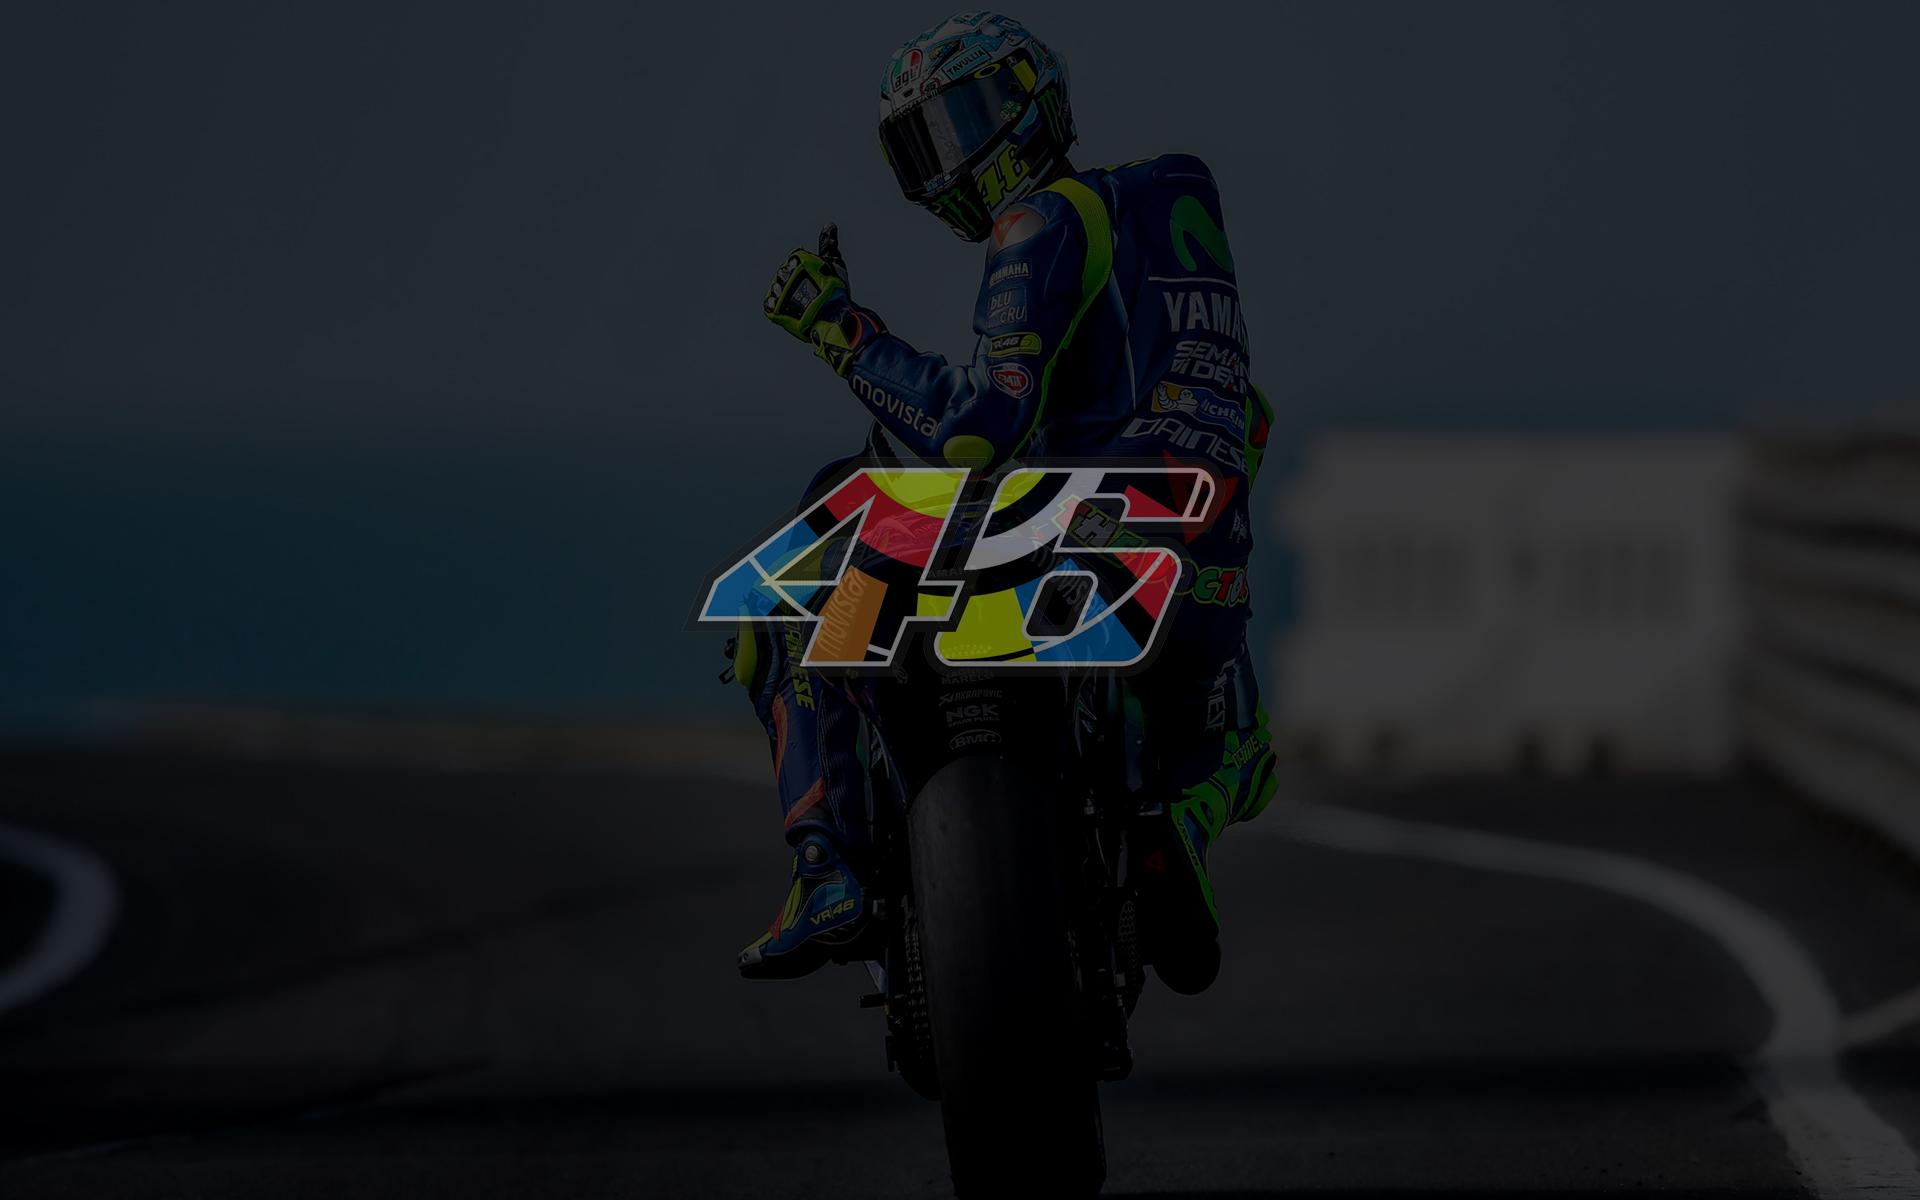 I liked this wallpaper I quickly made so here it is: motogp